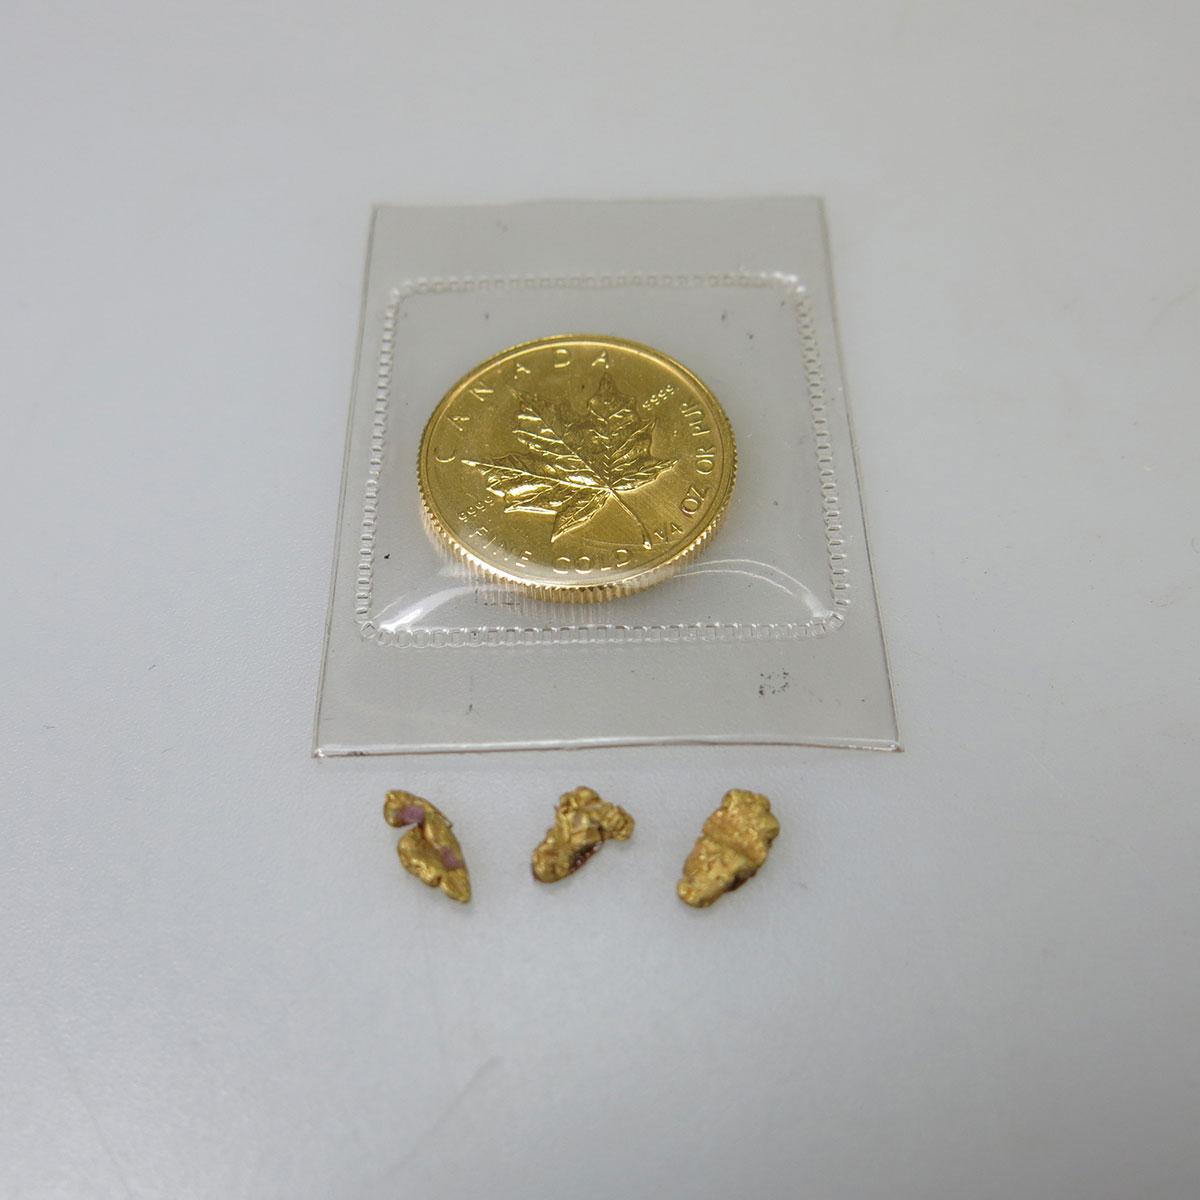 Canadian One Quarter Ounce Gold Maple Leaf Coin